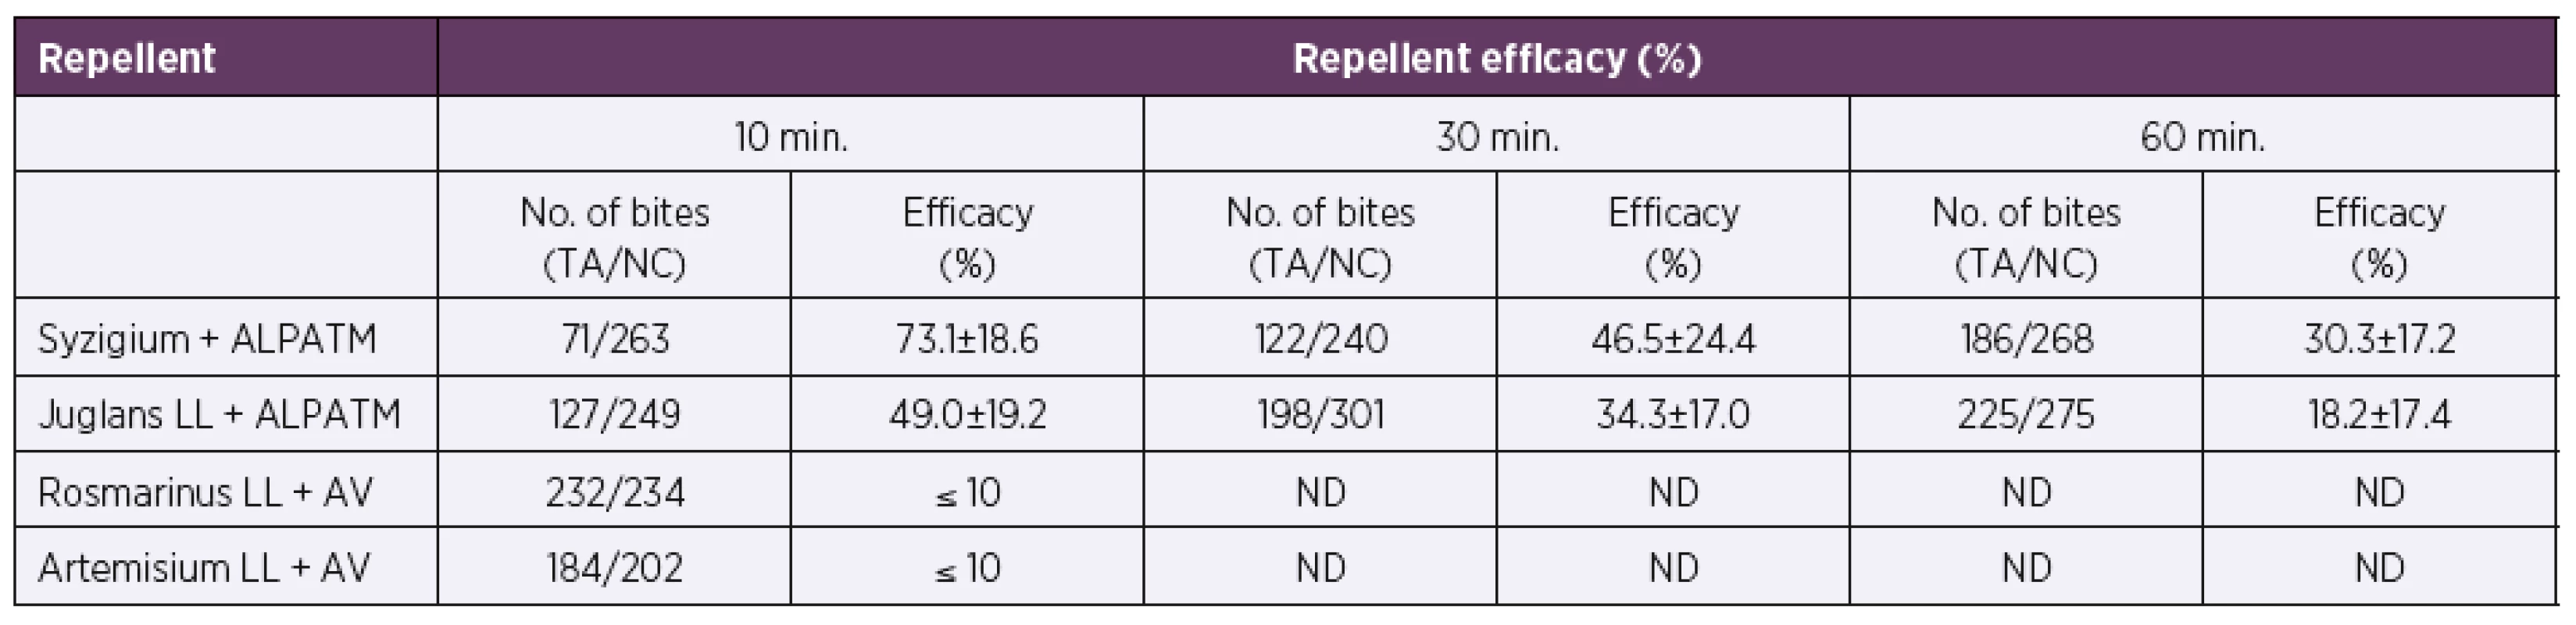 Efficacy of tested homemade natural repellents against Aedes aegypti mosquitoes expressed by total number of bites and per cent efficacy